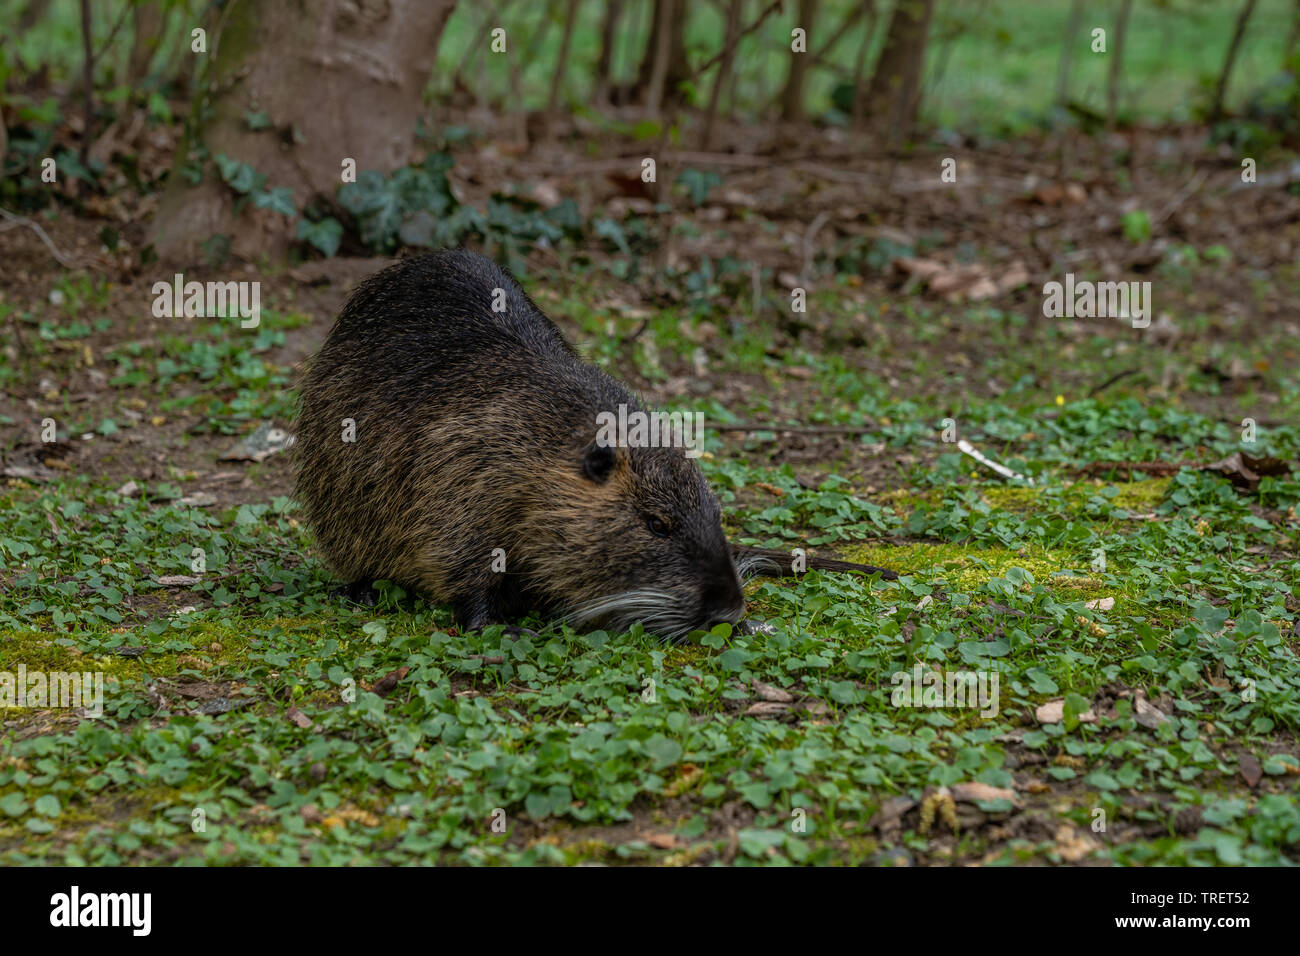 Coypu or Nutria rodent in the wild, frankfurt, germany Stock Photo